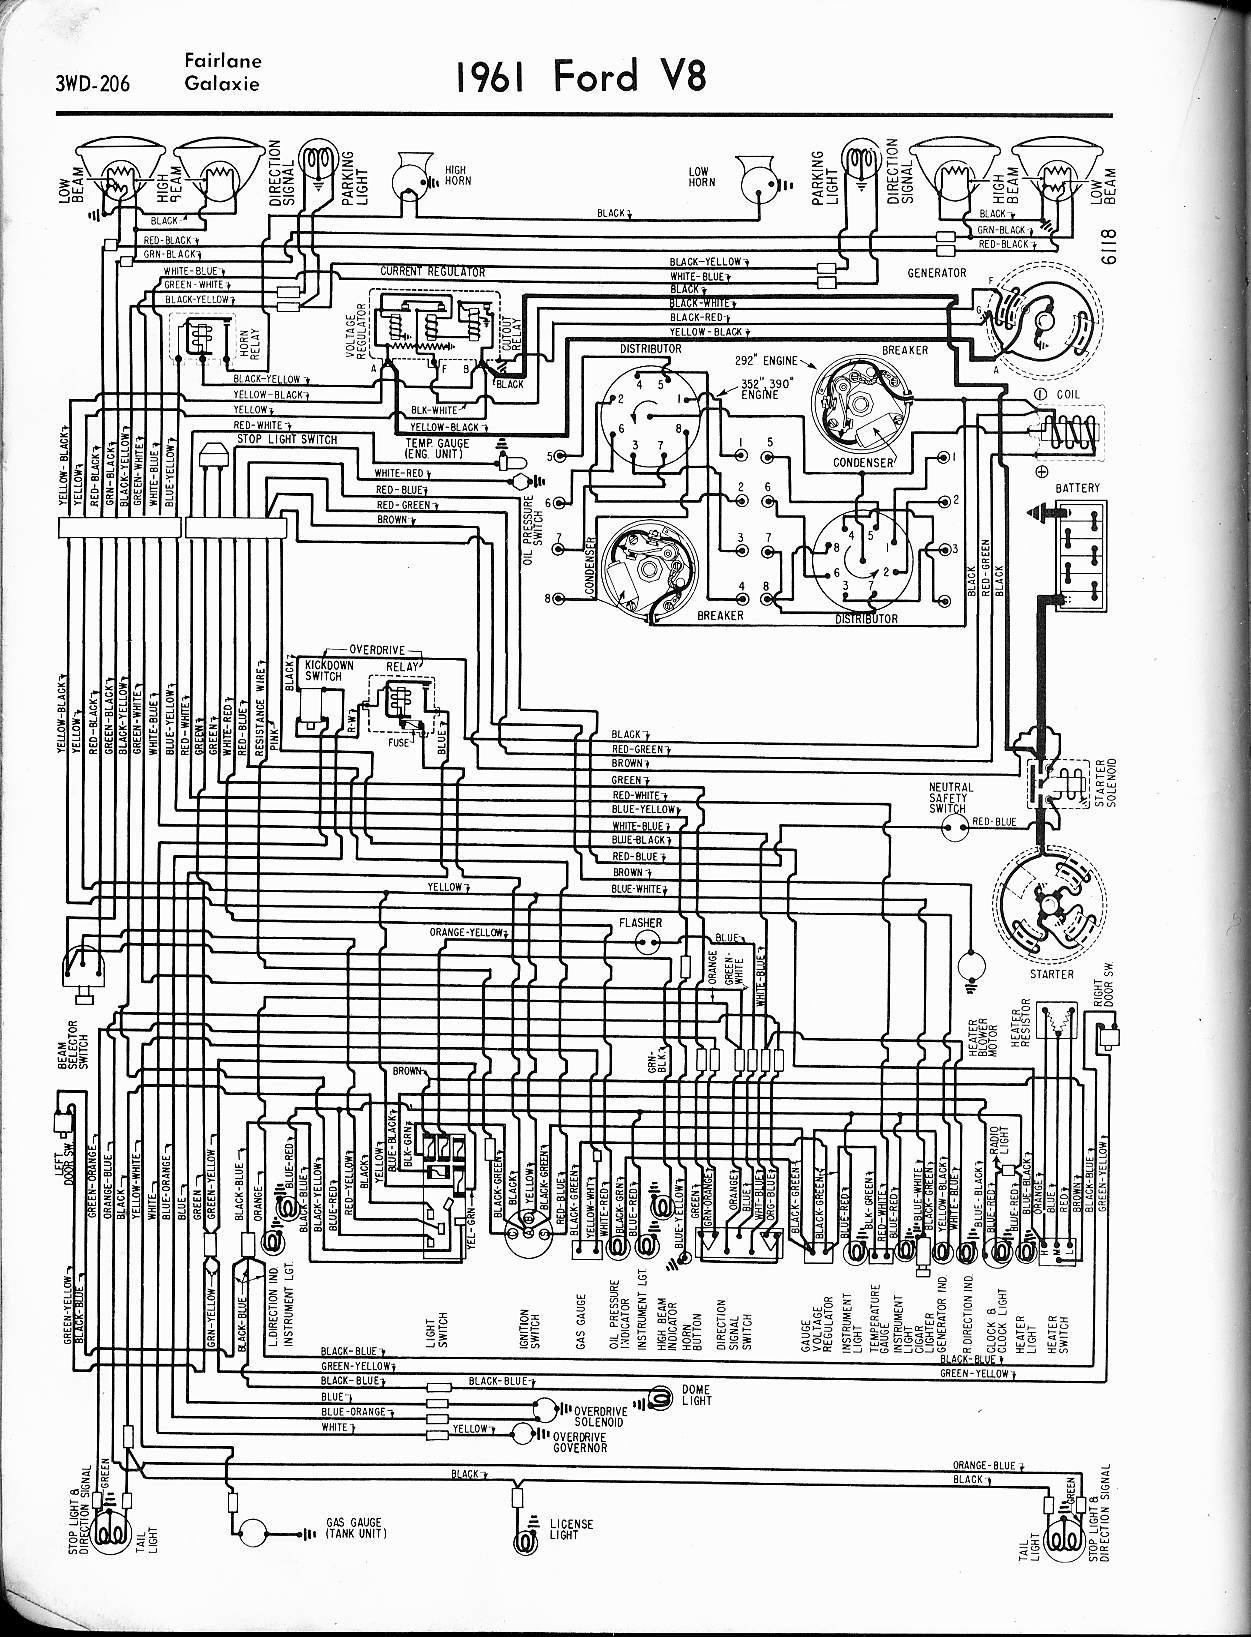 2004 ford Explorer Parts Diagram 57 65 ford Wiring Diagrams Of 2004 ford Explorer Parts Diagram